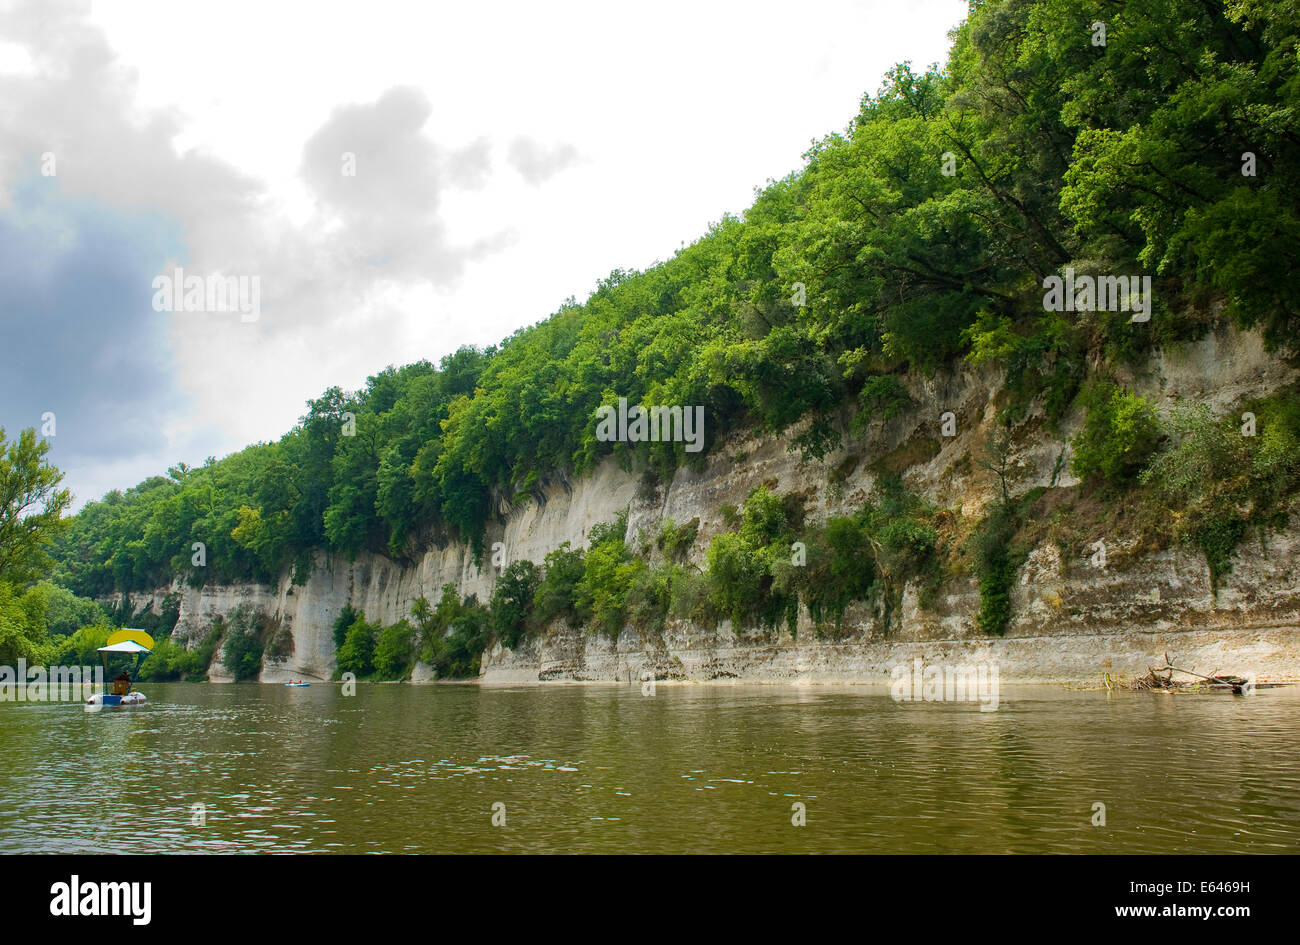 Cliffs on the banks of the river Dordogne in France Stock Photo